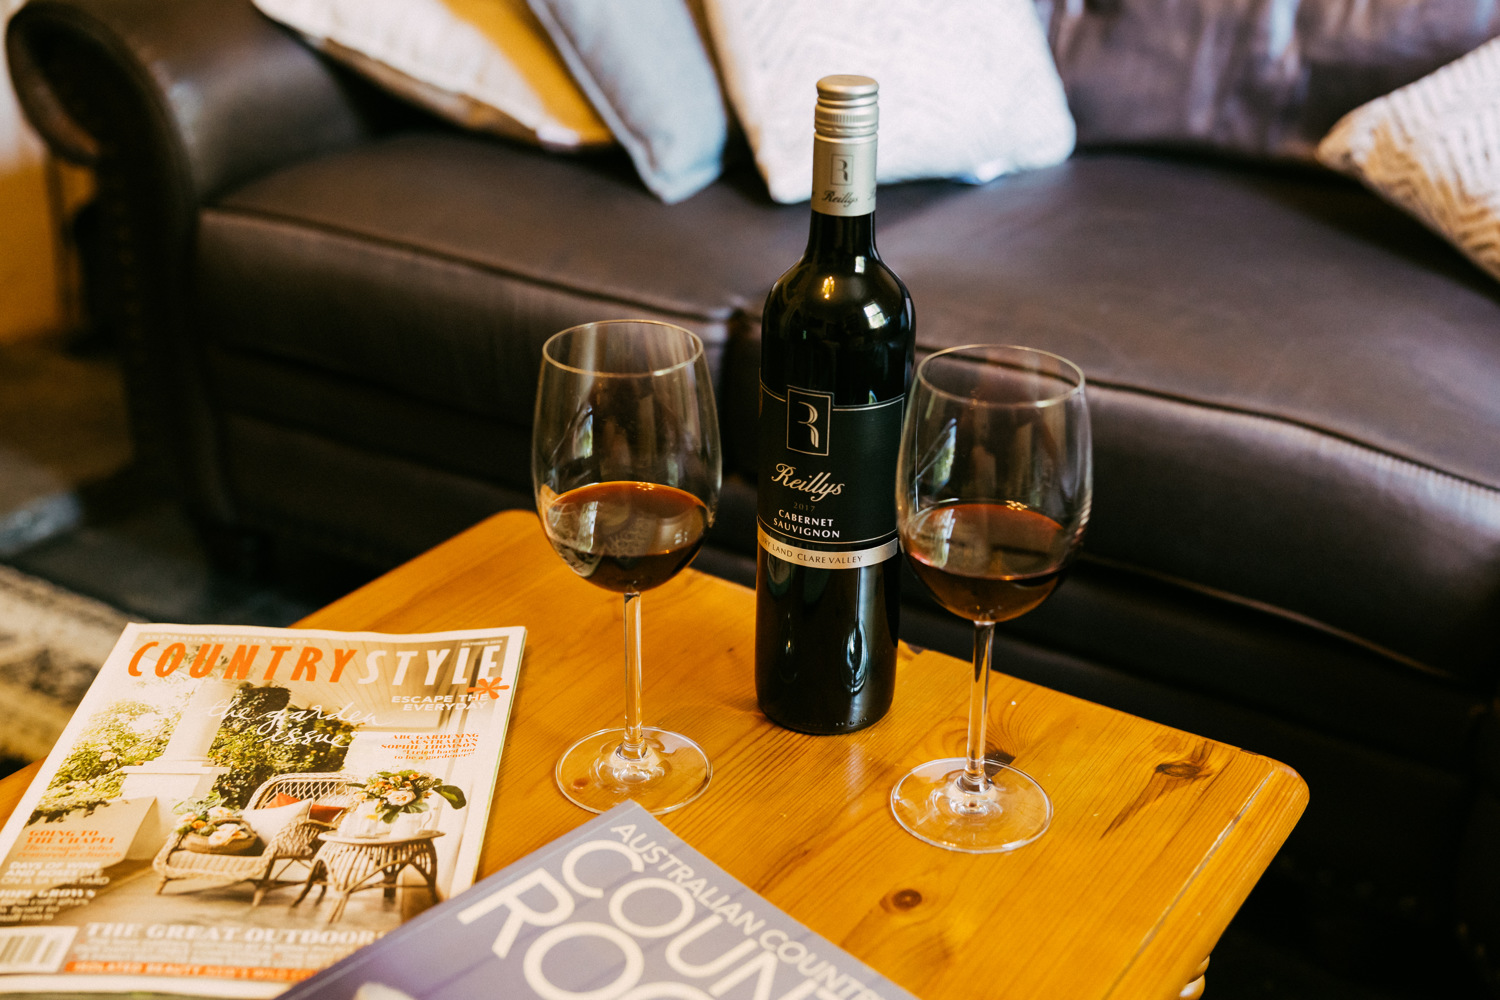 Relax with a wine and a book!